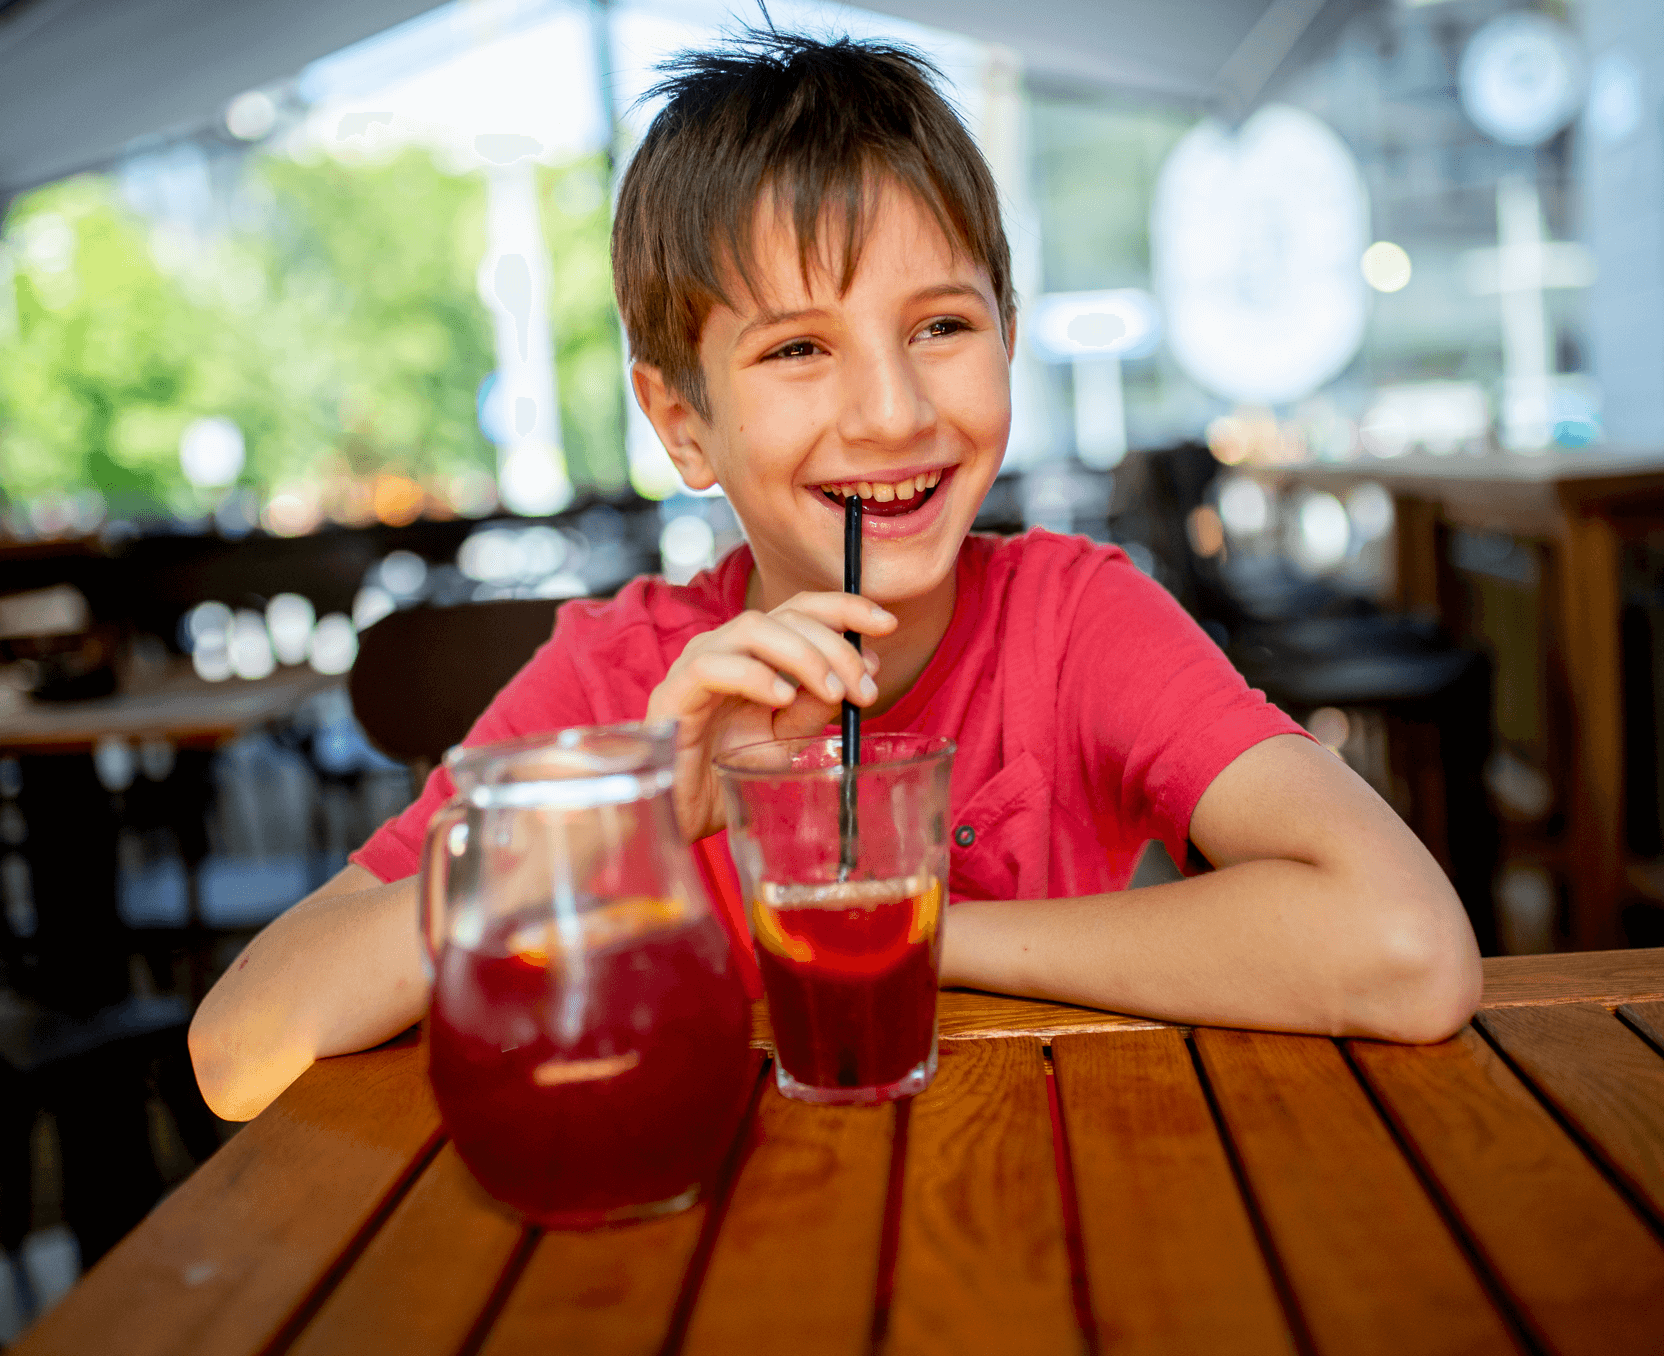 A young boy sitting at a table with two glasses of juice